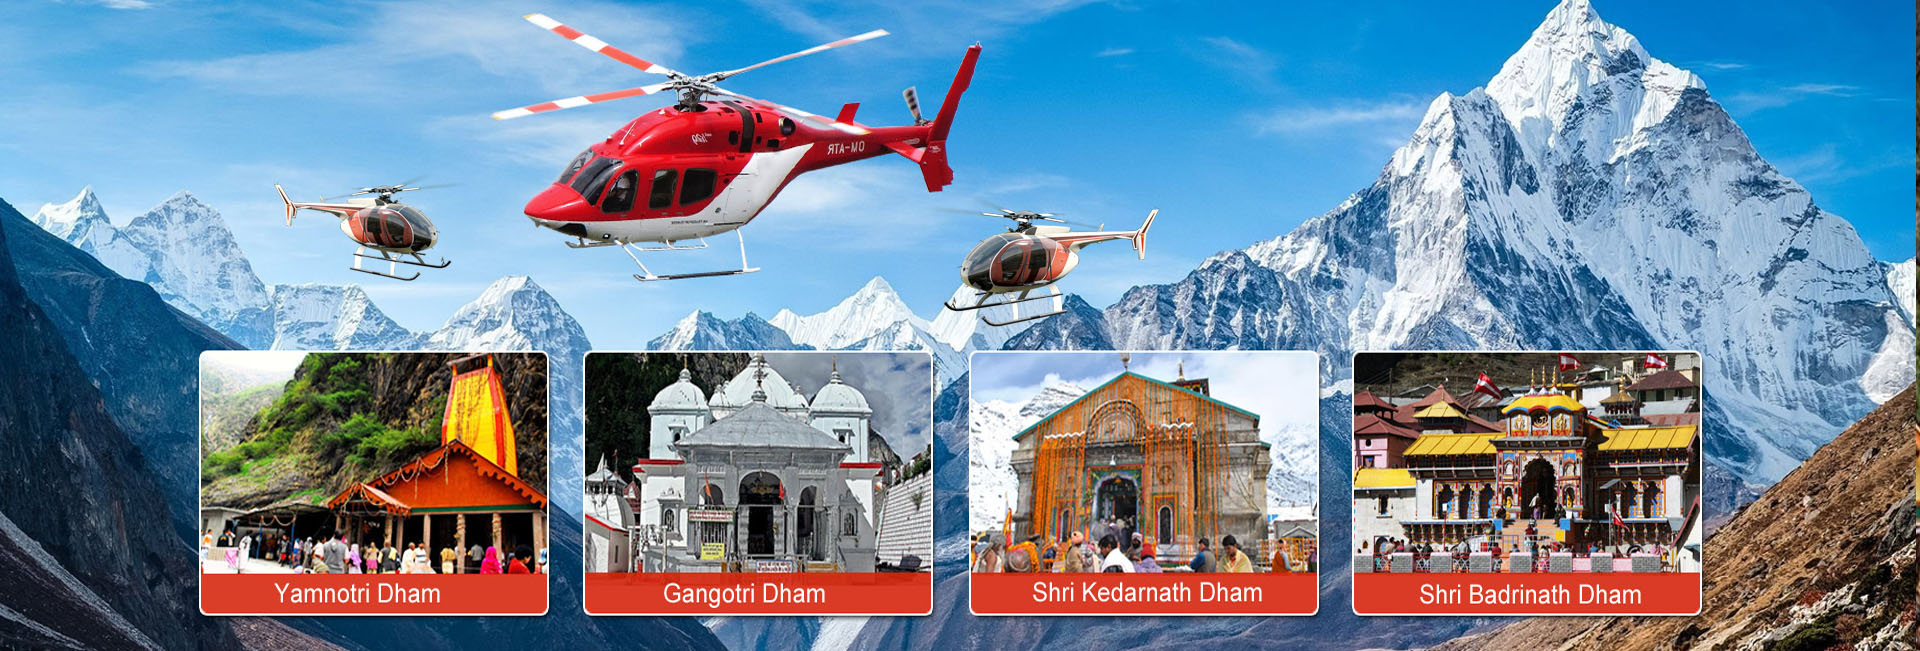 chardham-yatra-by-helicopter-banner